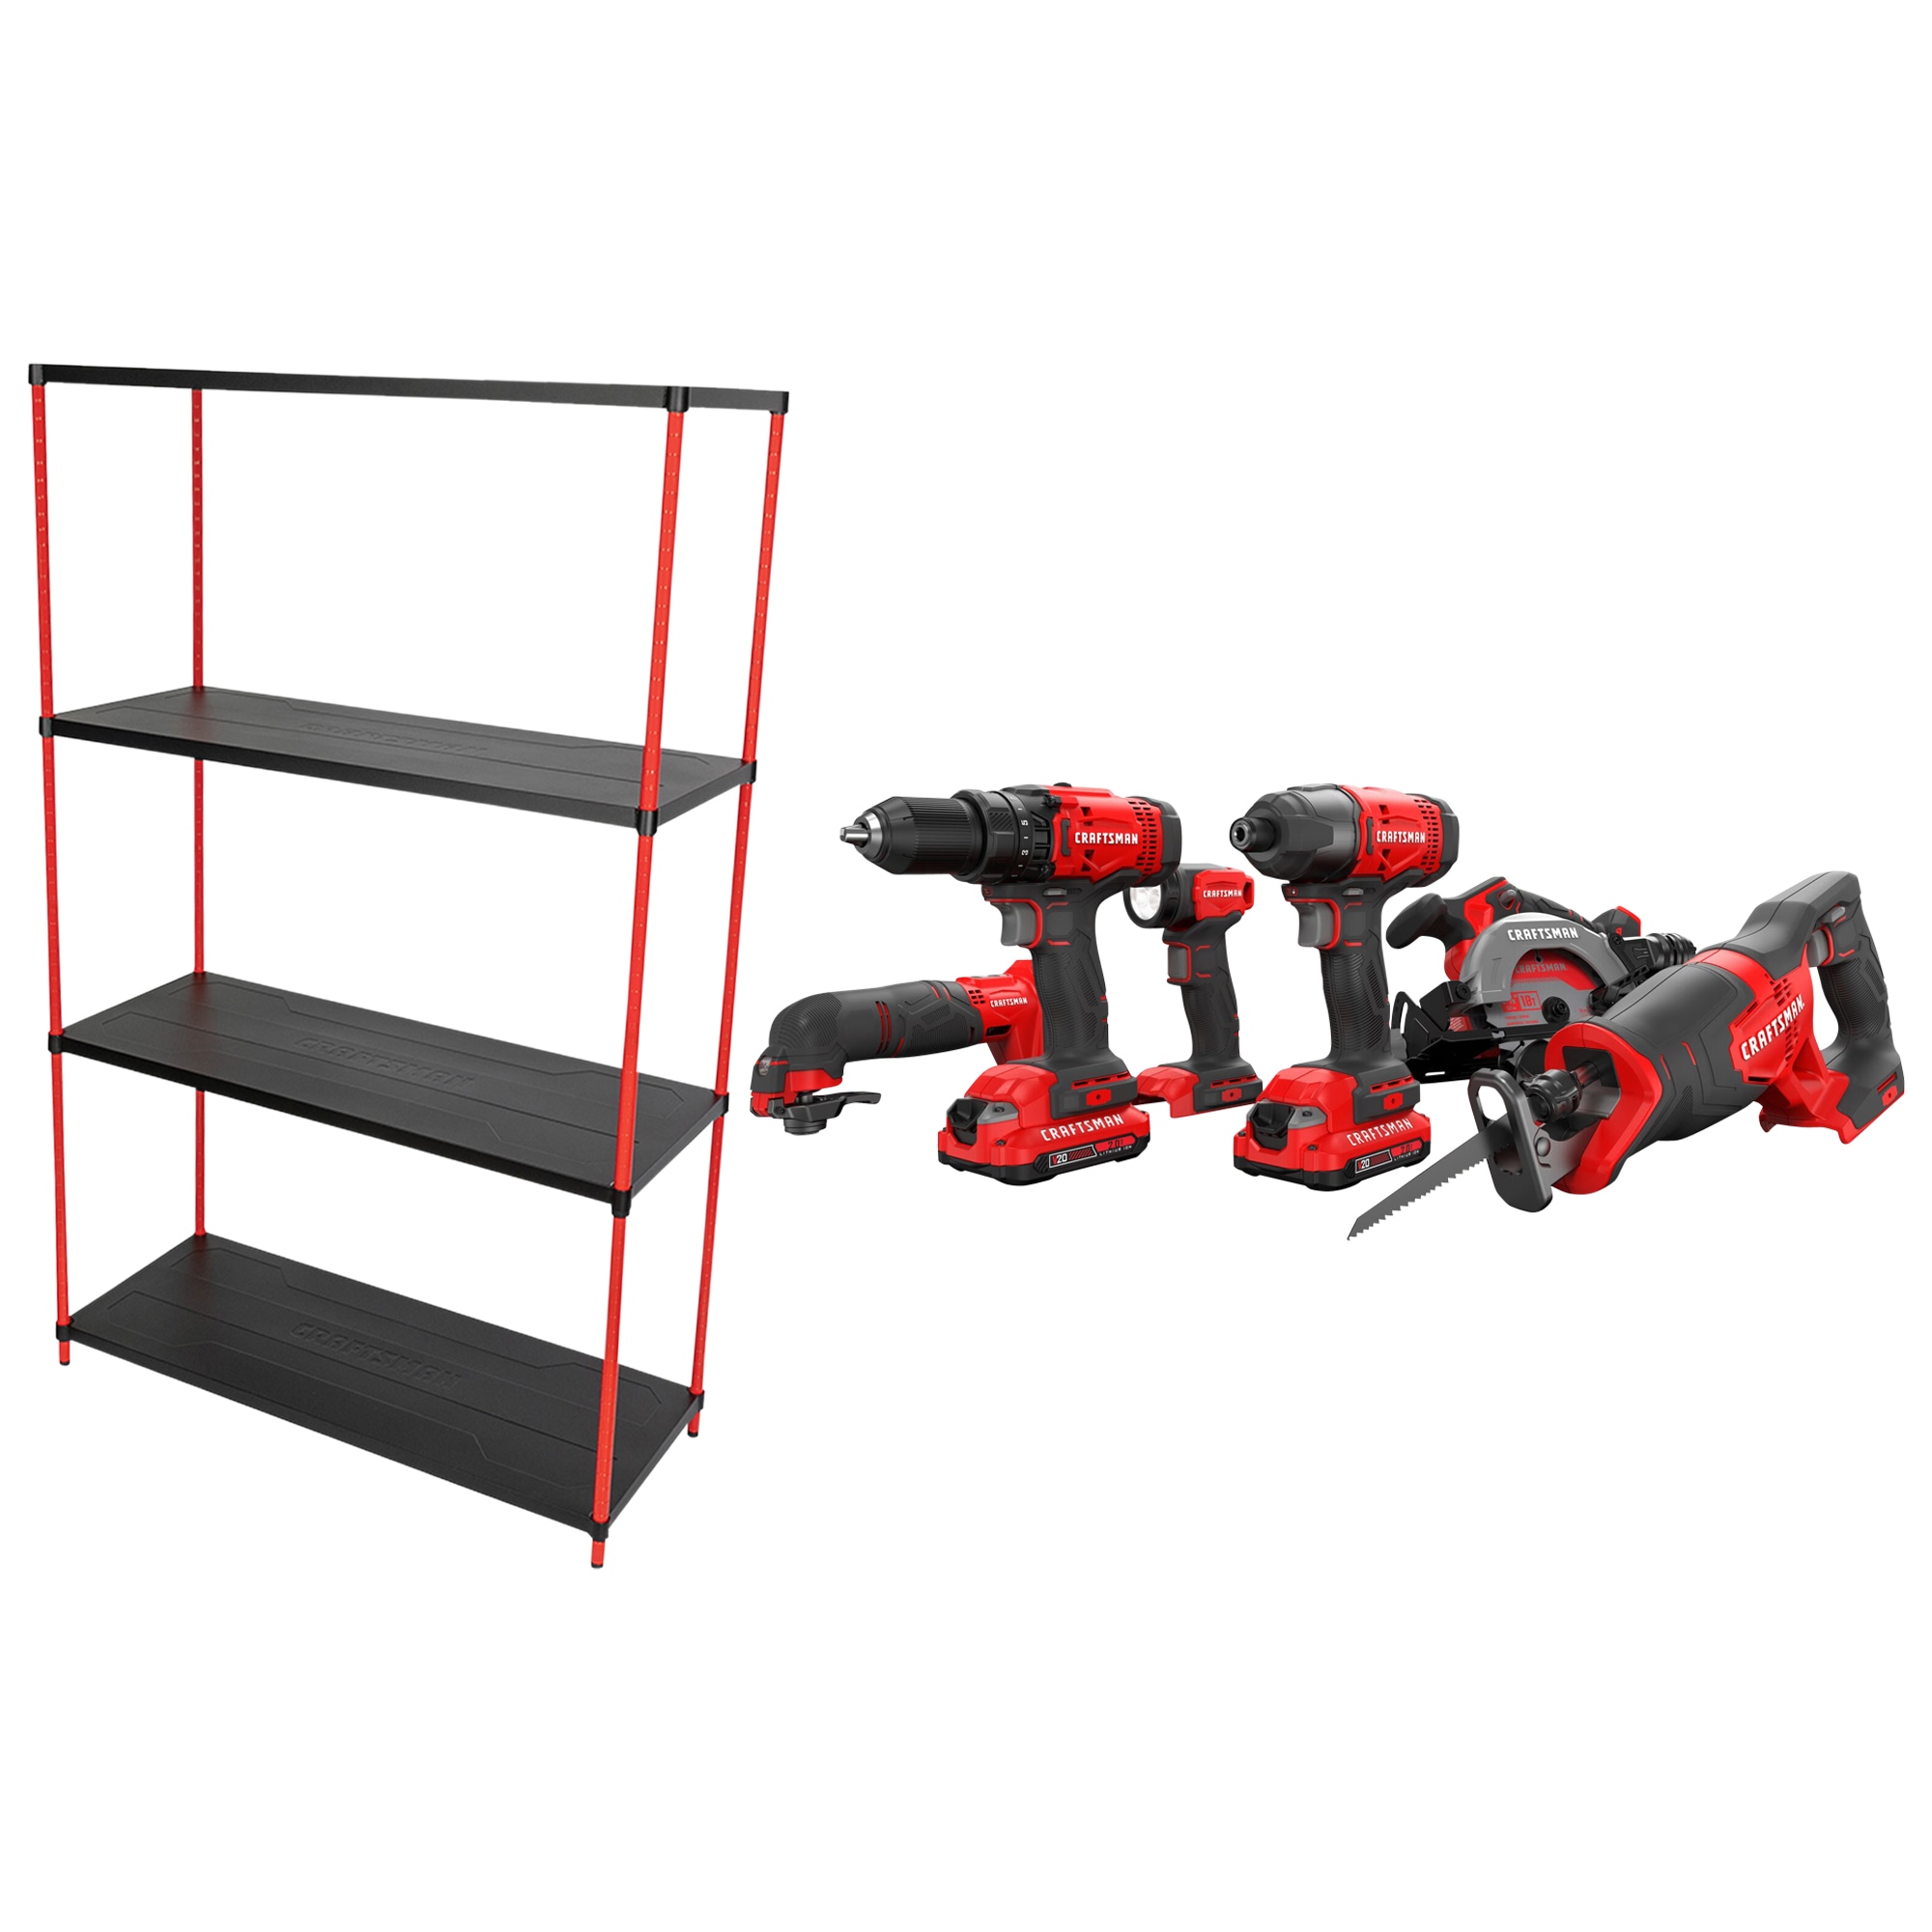 CRAFTSMAN Steel 4-Tier Utility Shelving Unit (45-in W x 18-in D x 72-in H) & V20 6-Tool 20-volt Max Power Tool Combo Kit with Soft Case (2-Batteries